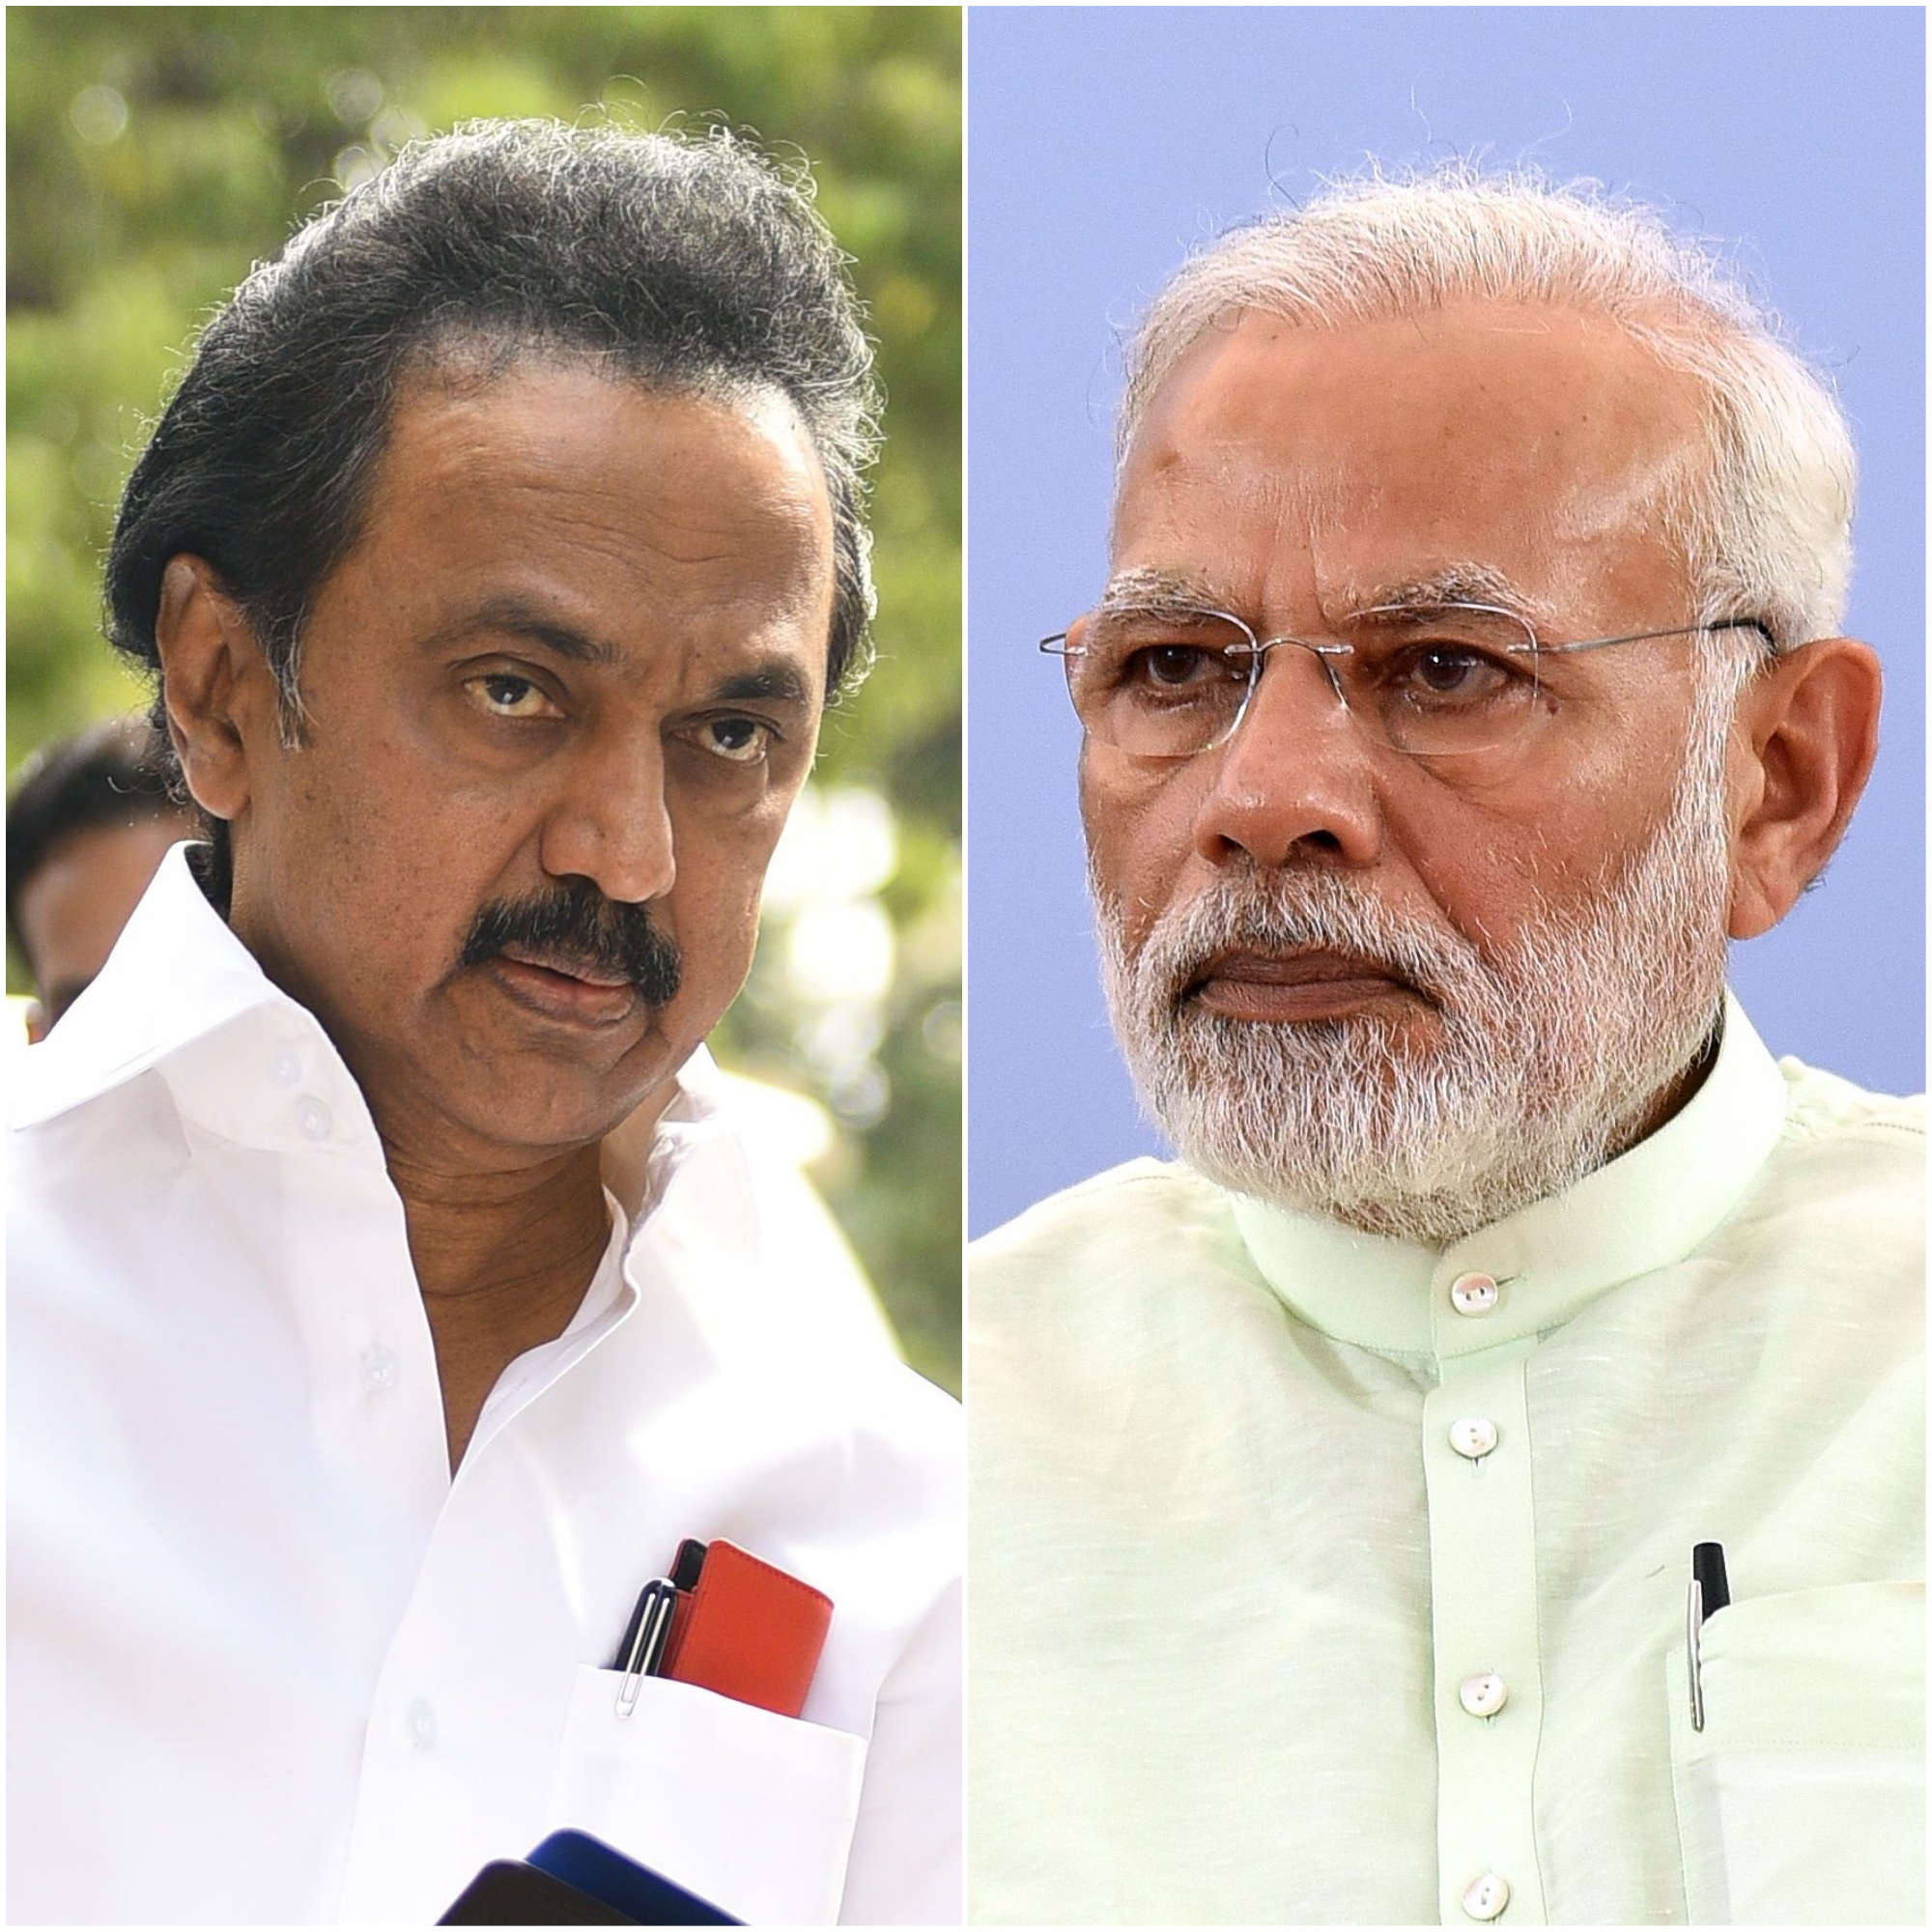 cauvery water management board: Cauvery Row: M K Stalin urges PM Narendra Modi to direct Water Resources ministry to withdraw Clarification Petition pending before SC